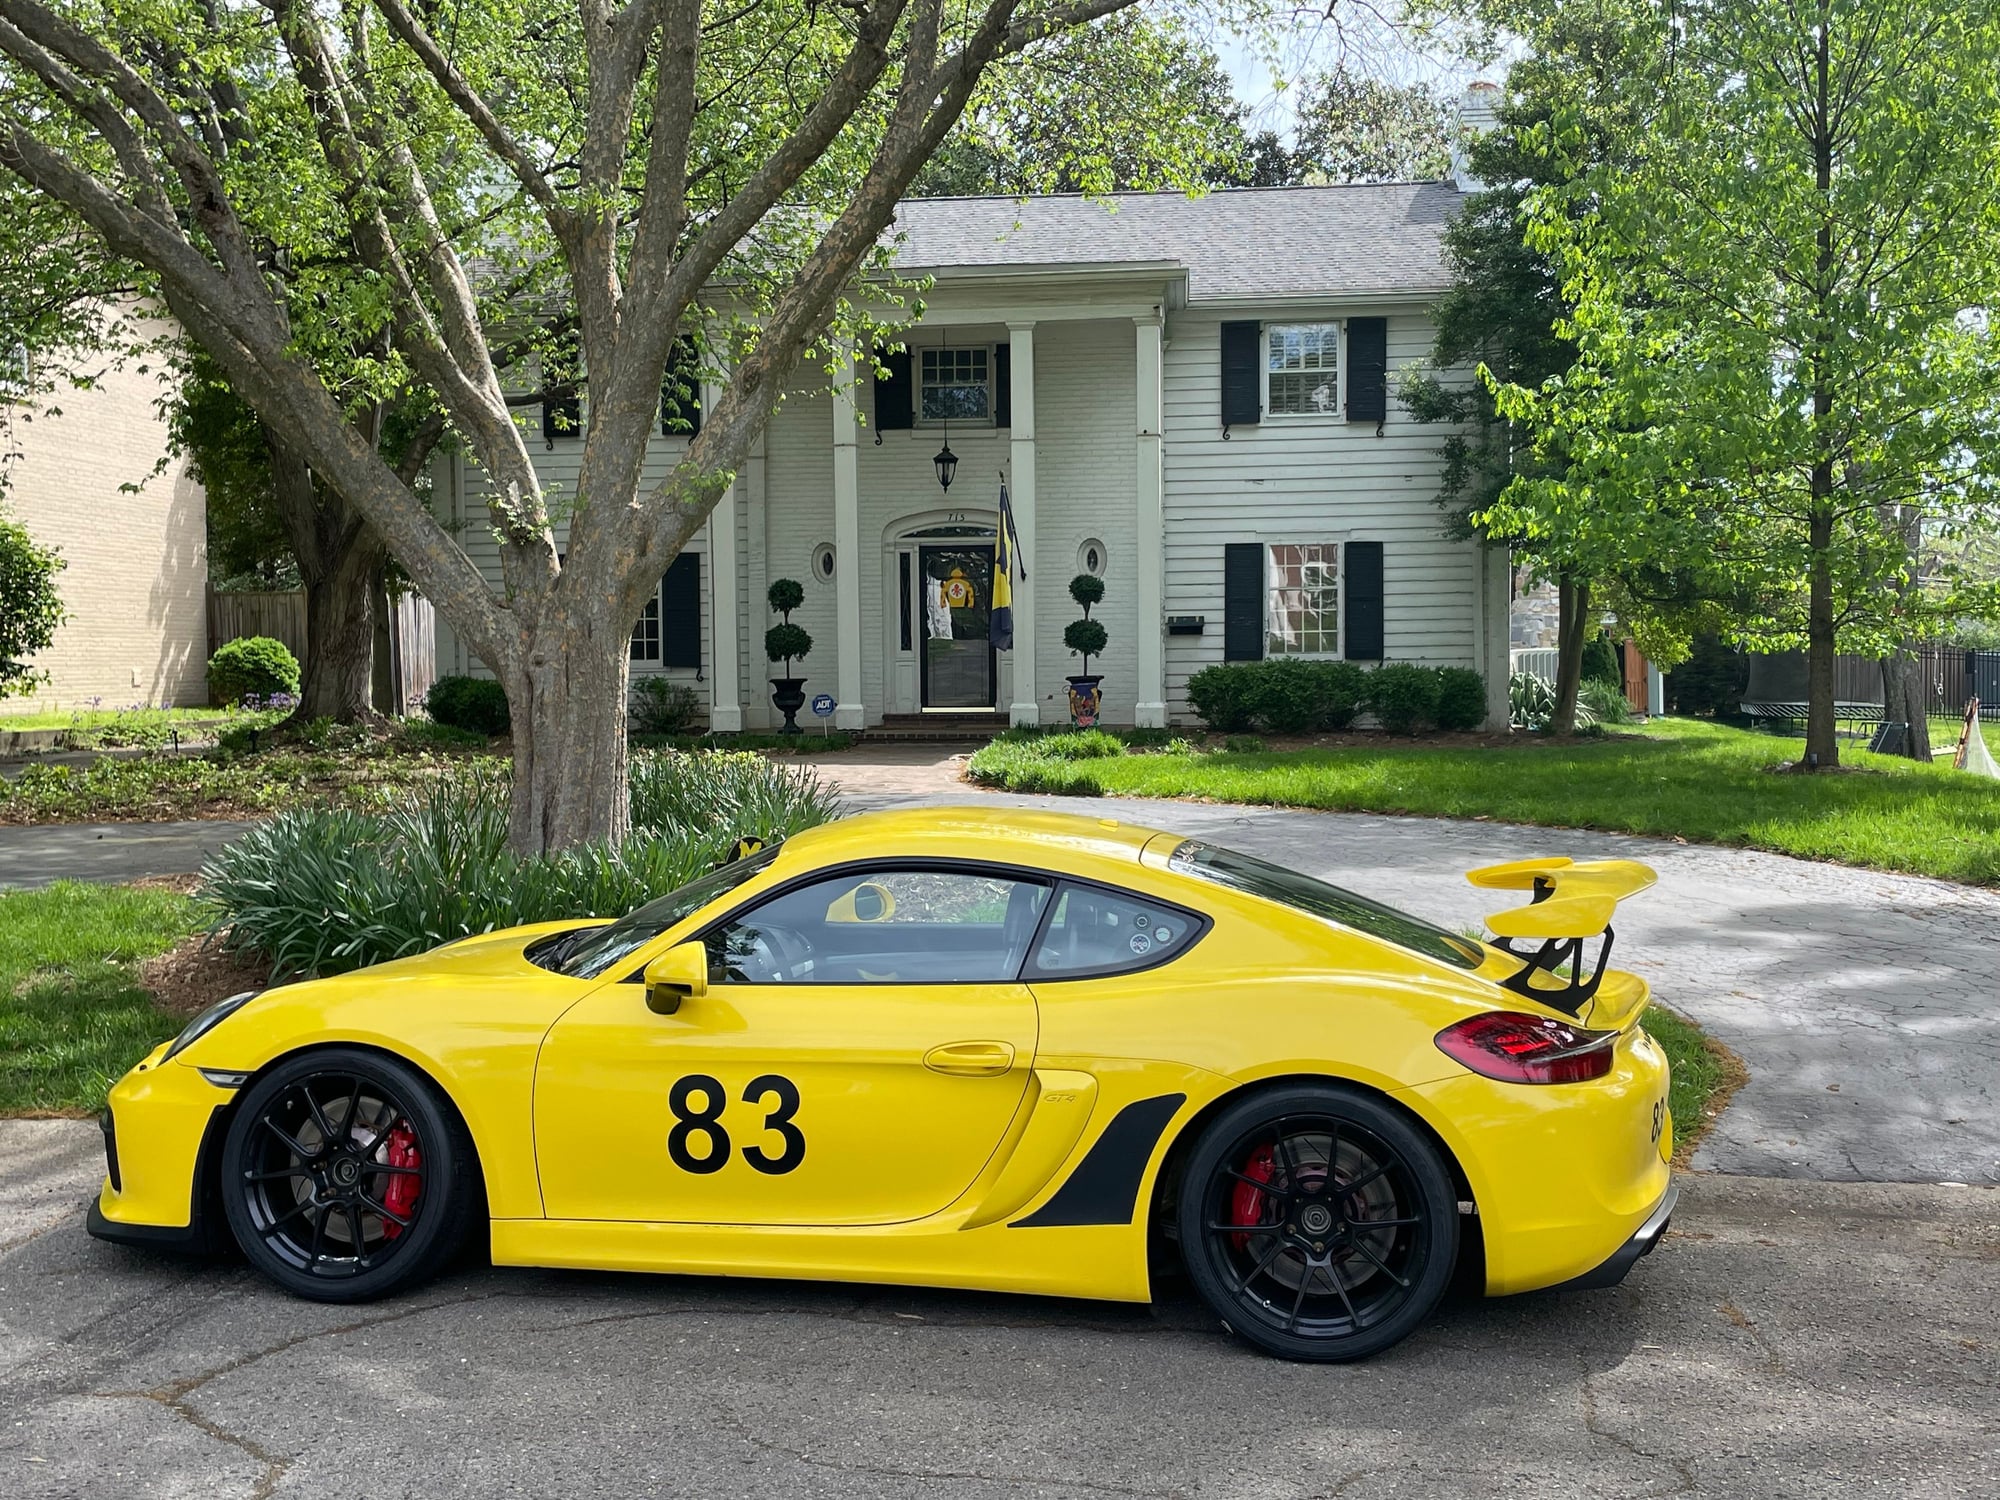 2016 Porsche Cayman GT4 - Don’t bring a trailer! 981 GT4 in Racing Yellow & 2016 Trailex CT-8405 trailer - Used - VIN WP0AC2A85GK191439 - 38,140 Miles - 6 cyl - 2WD - Manual - Coupe - Yellow - Louisville, KY 40205, United States